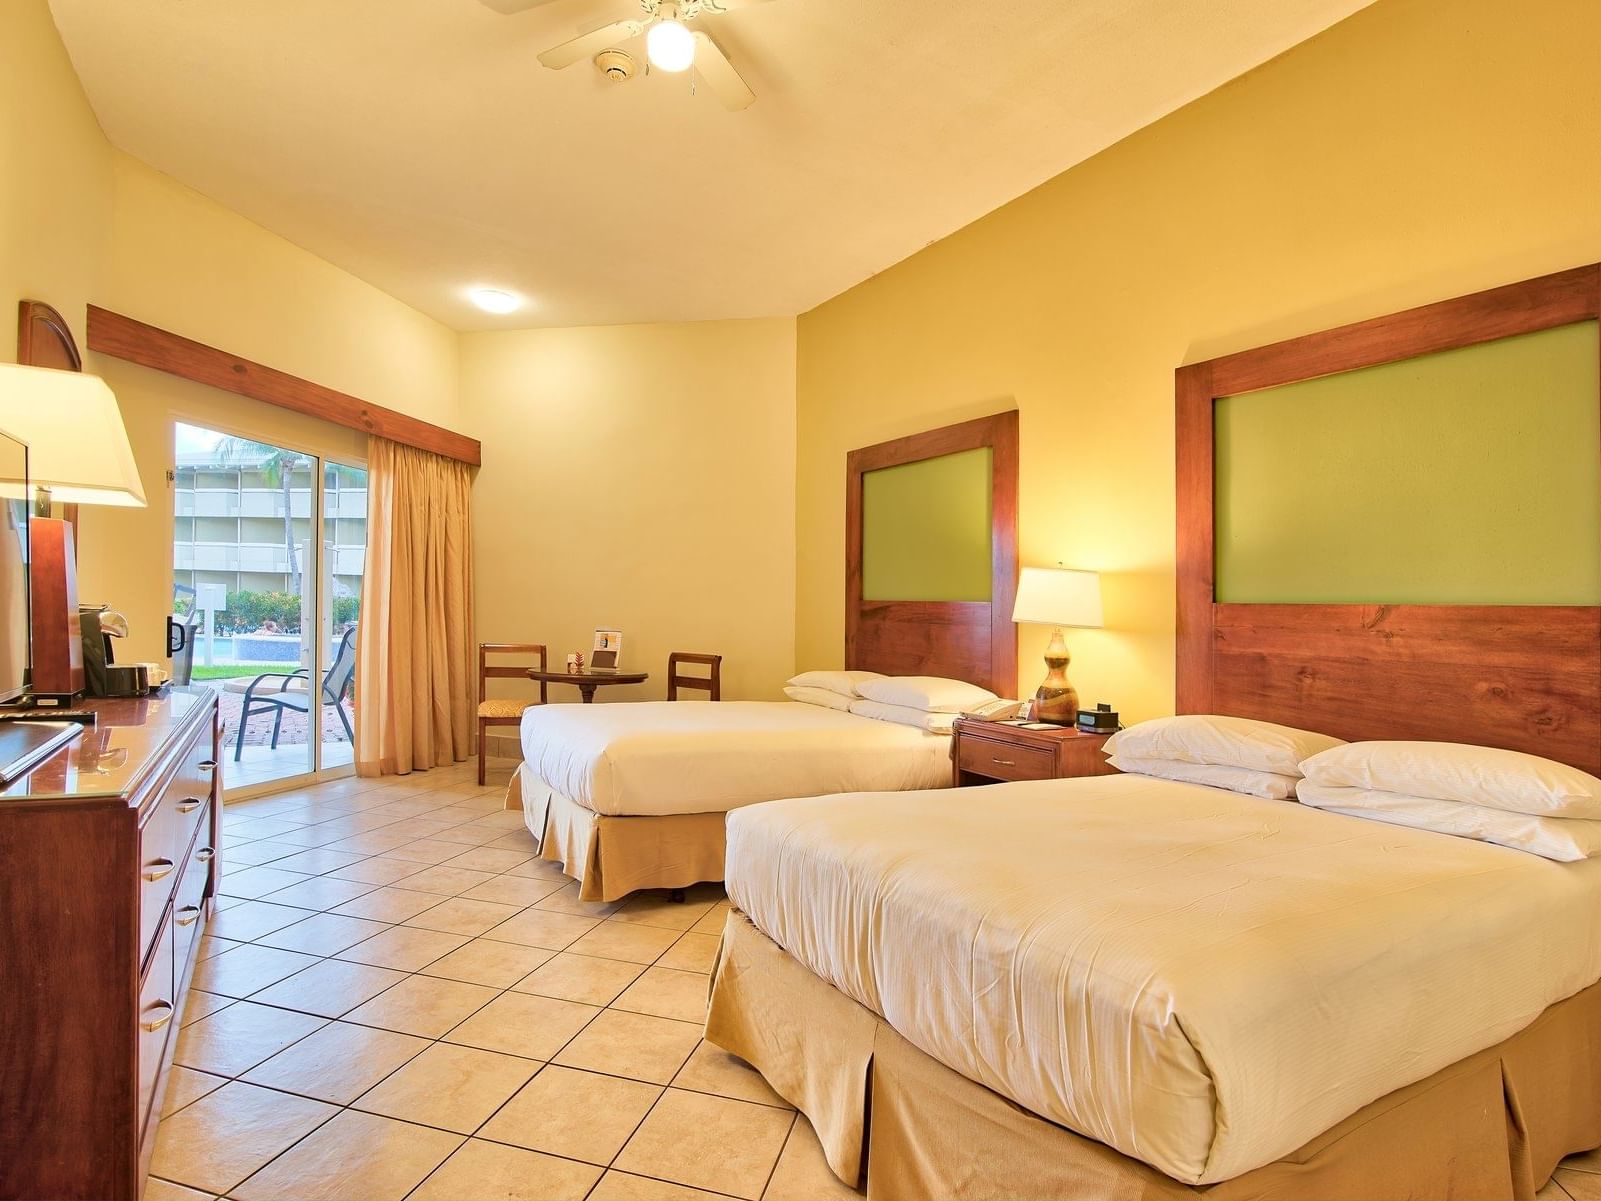 Accessibility preference large 2 king bed at Fiesta Resort 